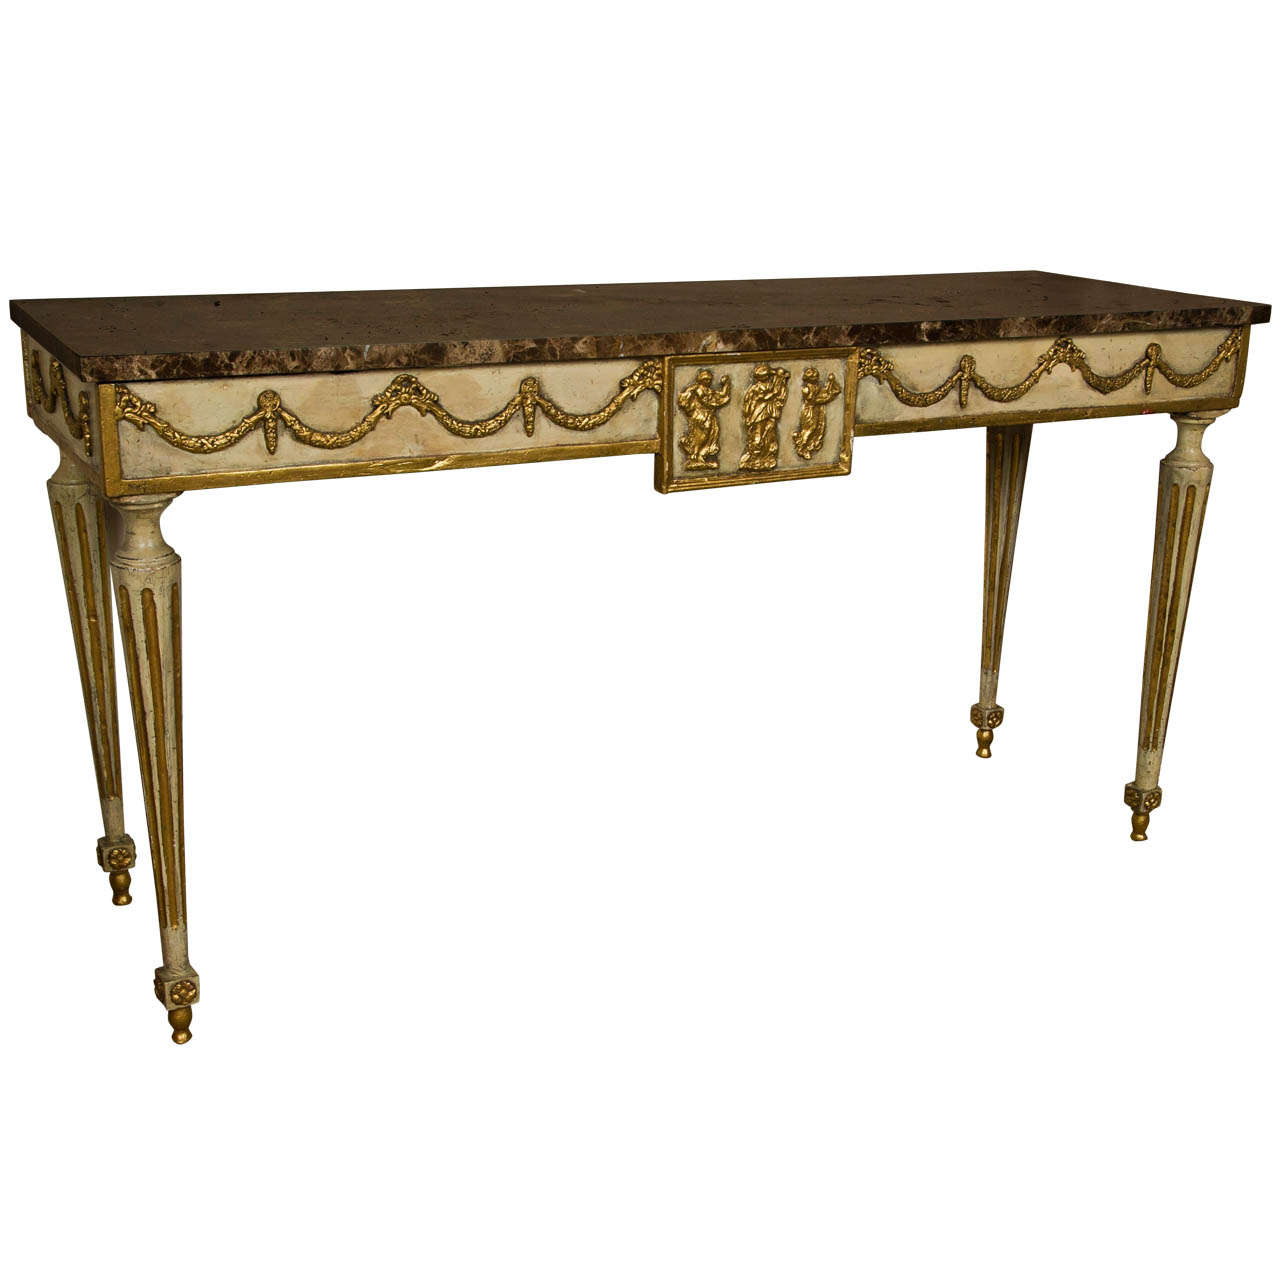 Neoclassical Style Marble Topped Painted and Gilt Console Table